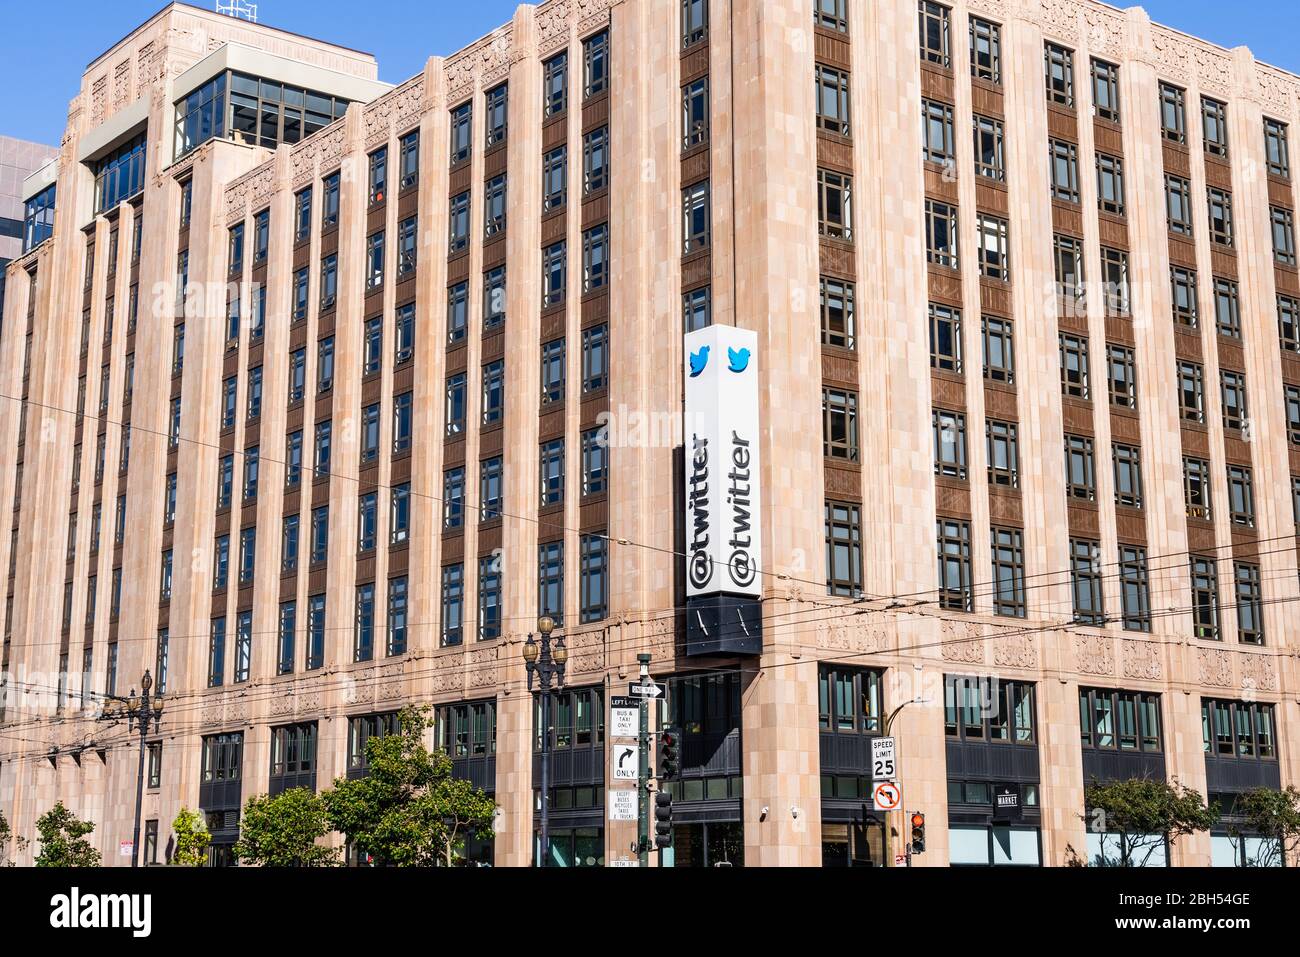 Aug 21, 2019 San Francisco / CA / USA - Twitter headquarters in SOMA district;  Twitter Inc is an American microblogging and social networking service Stock Photo